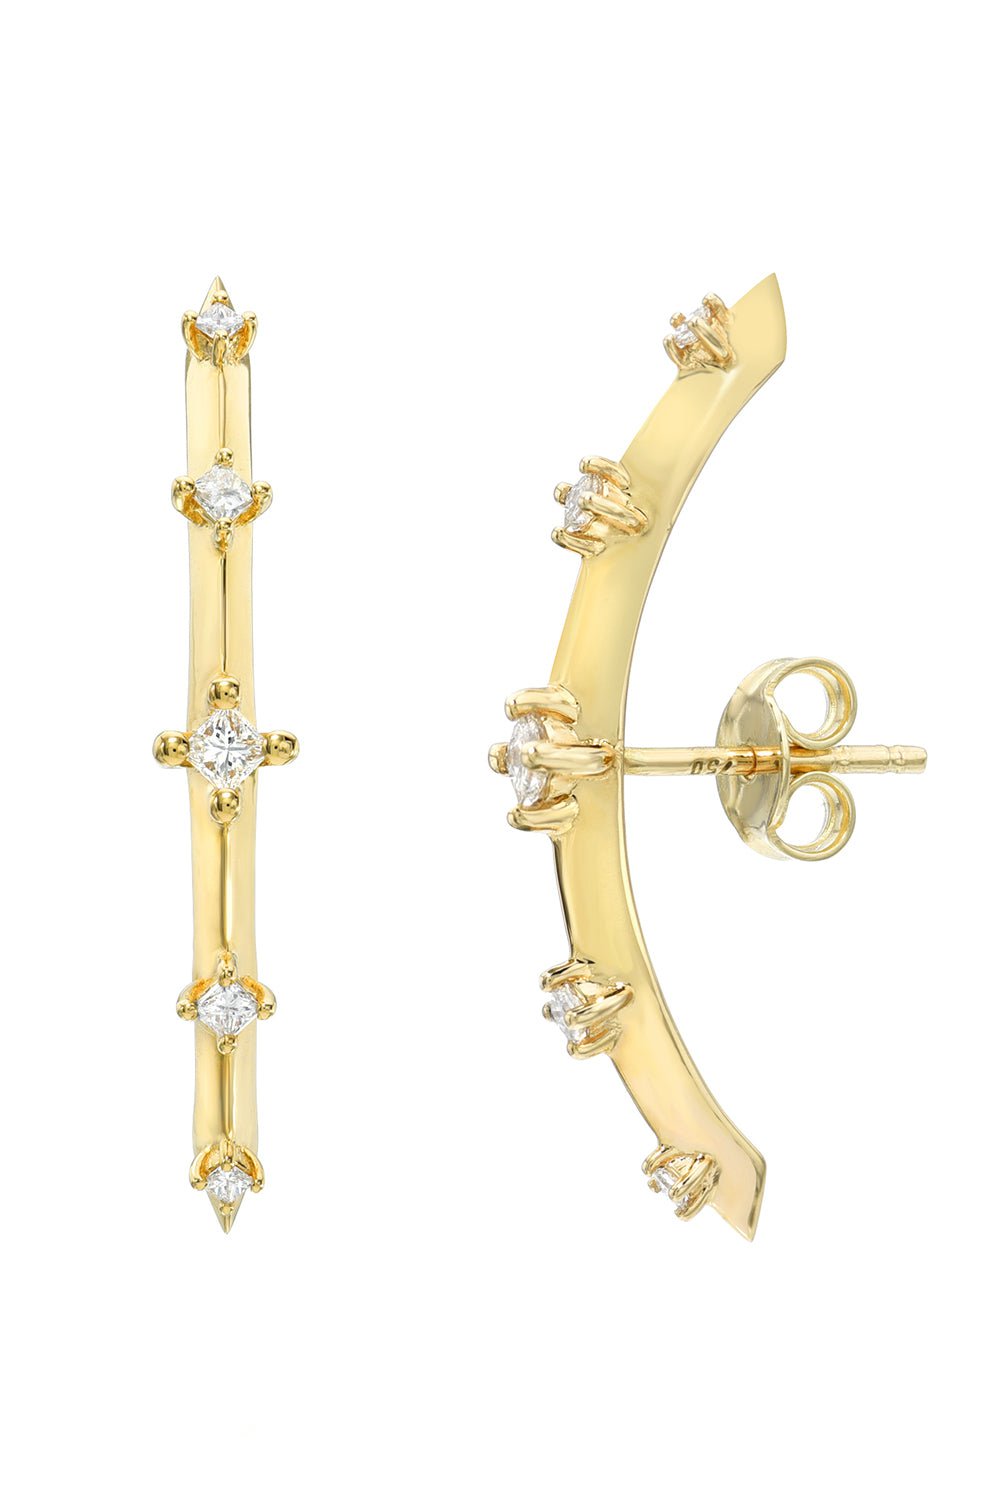 MEREDITH YOUNG-Princess Ear Cuffs-YELLOW GOLD